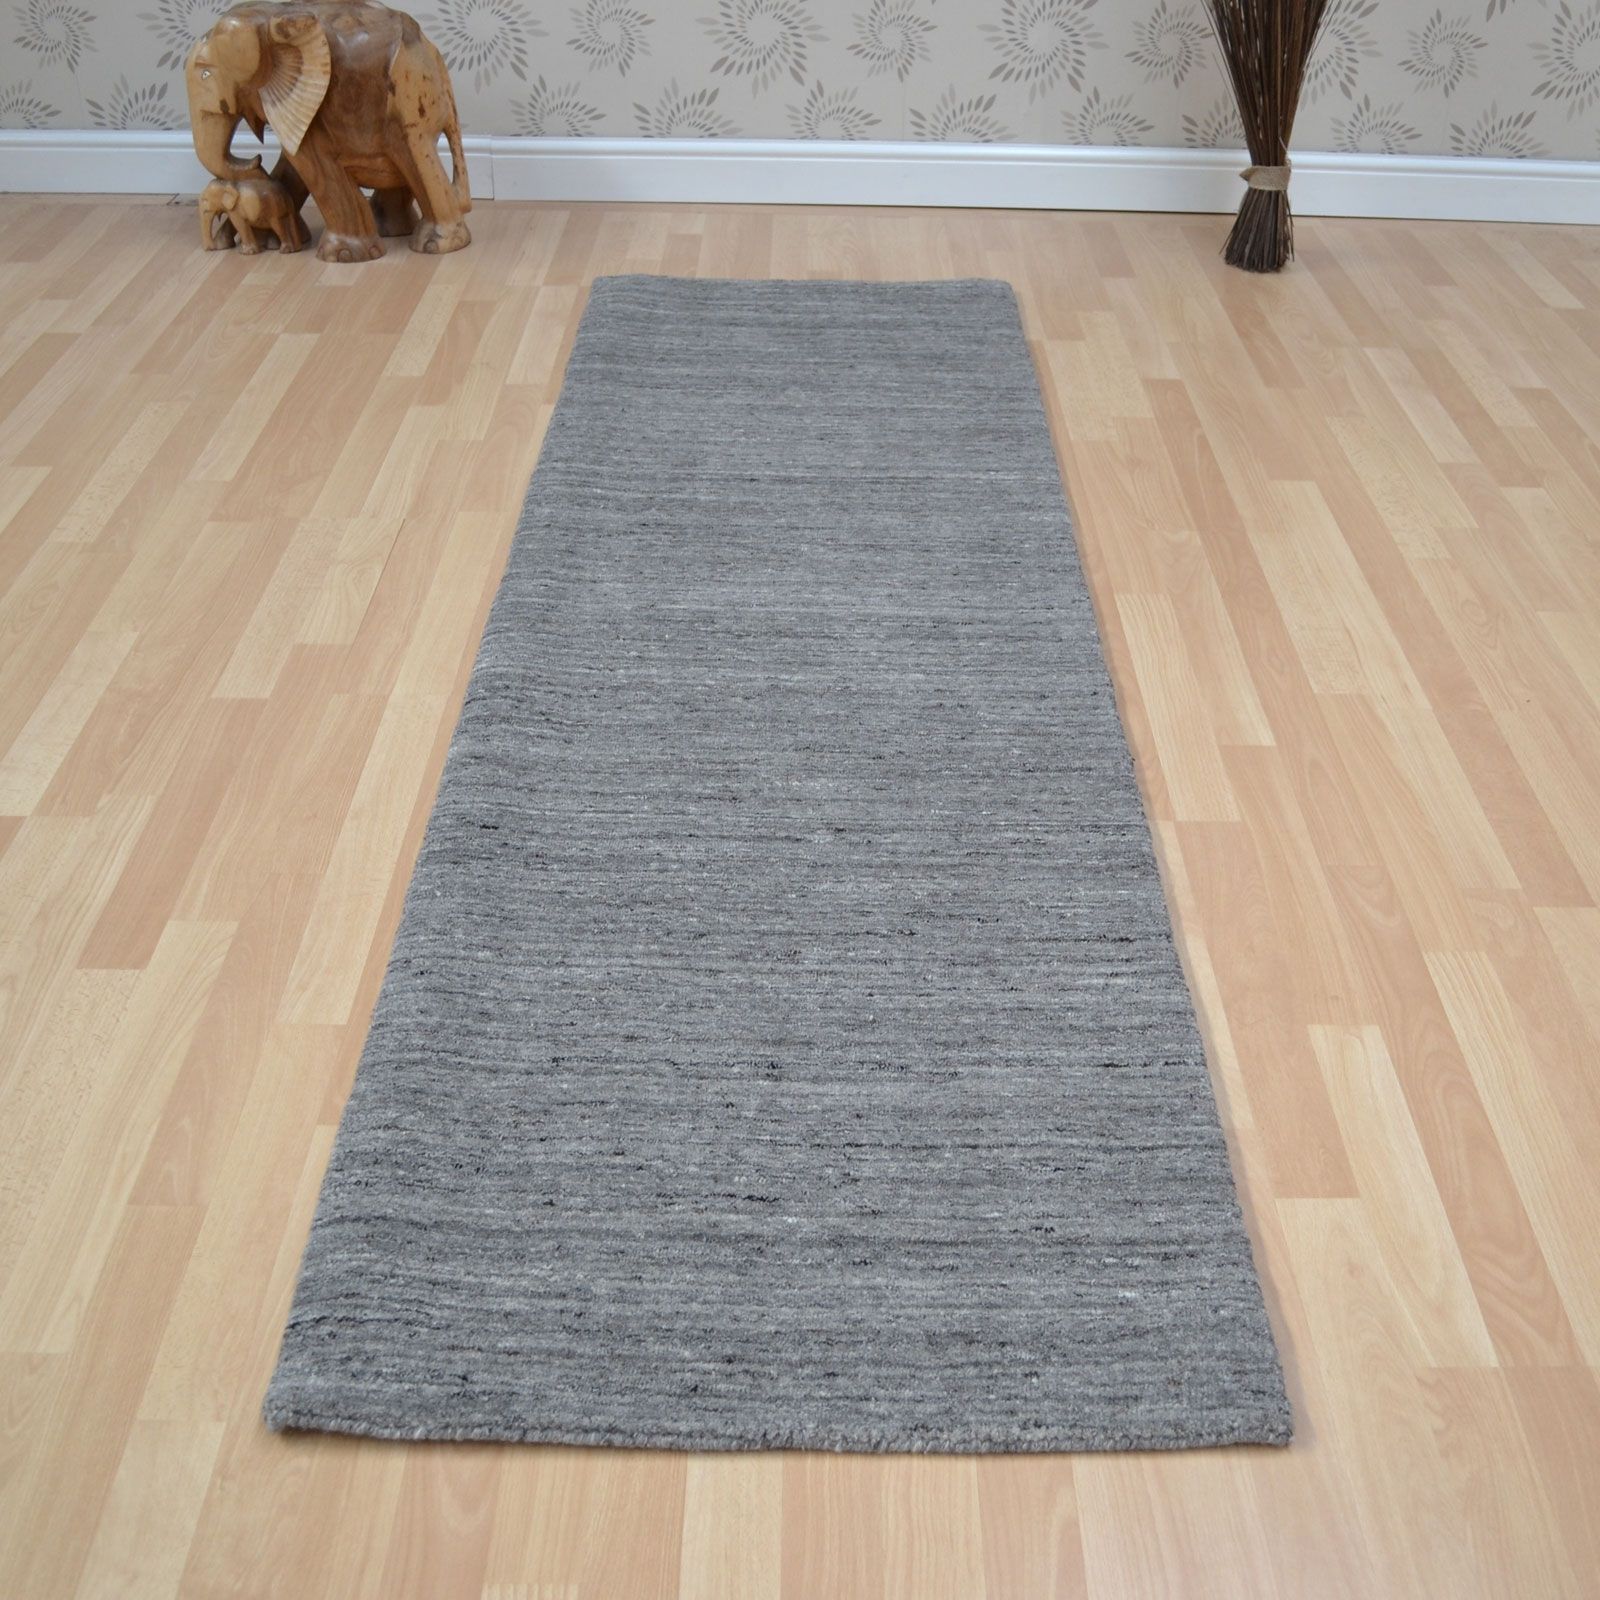 Hallway Runners Find The Best Hall Rug For Your Home With Regard To Hall Runners And Door Mats (View 16 of 20)